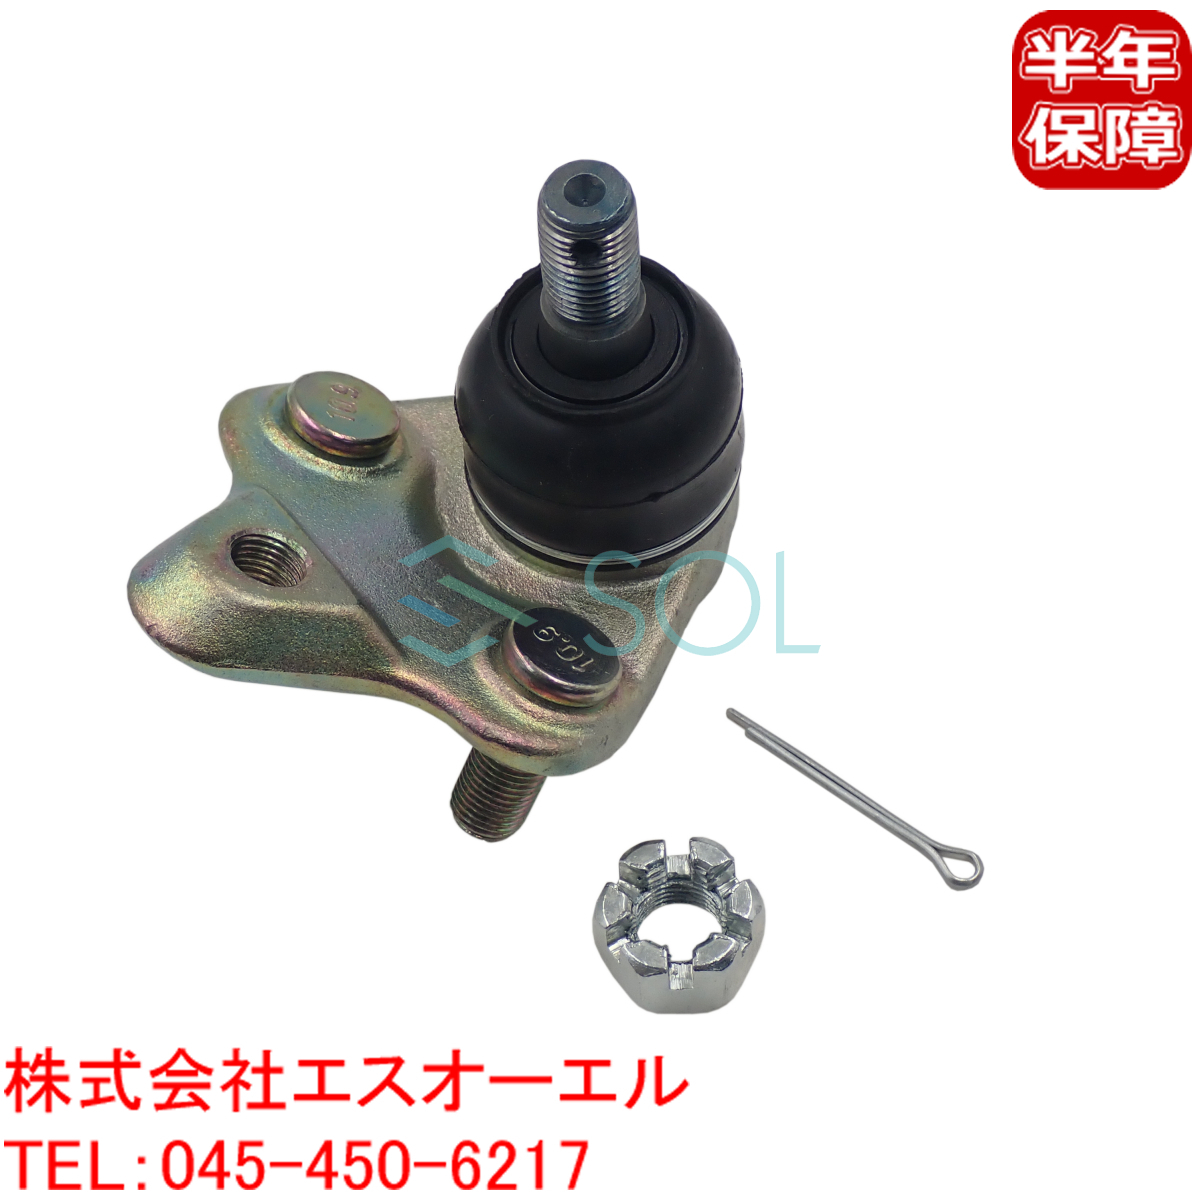  Toyota Celica (ZZT230 ZZT231) Corolla (AE100 AE101) front lower arm ball joint break up pin nut attaching left right common 43330-19115